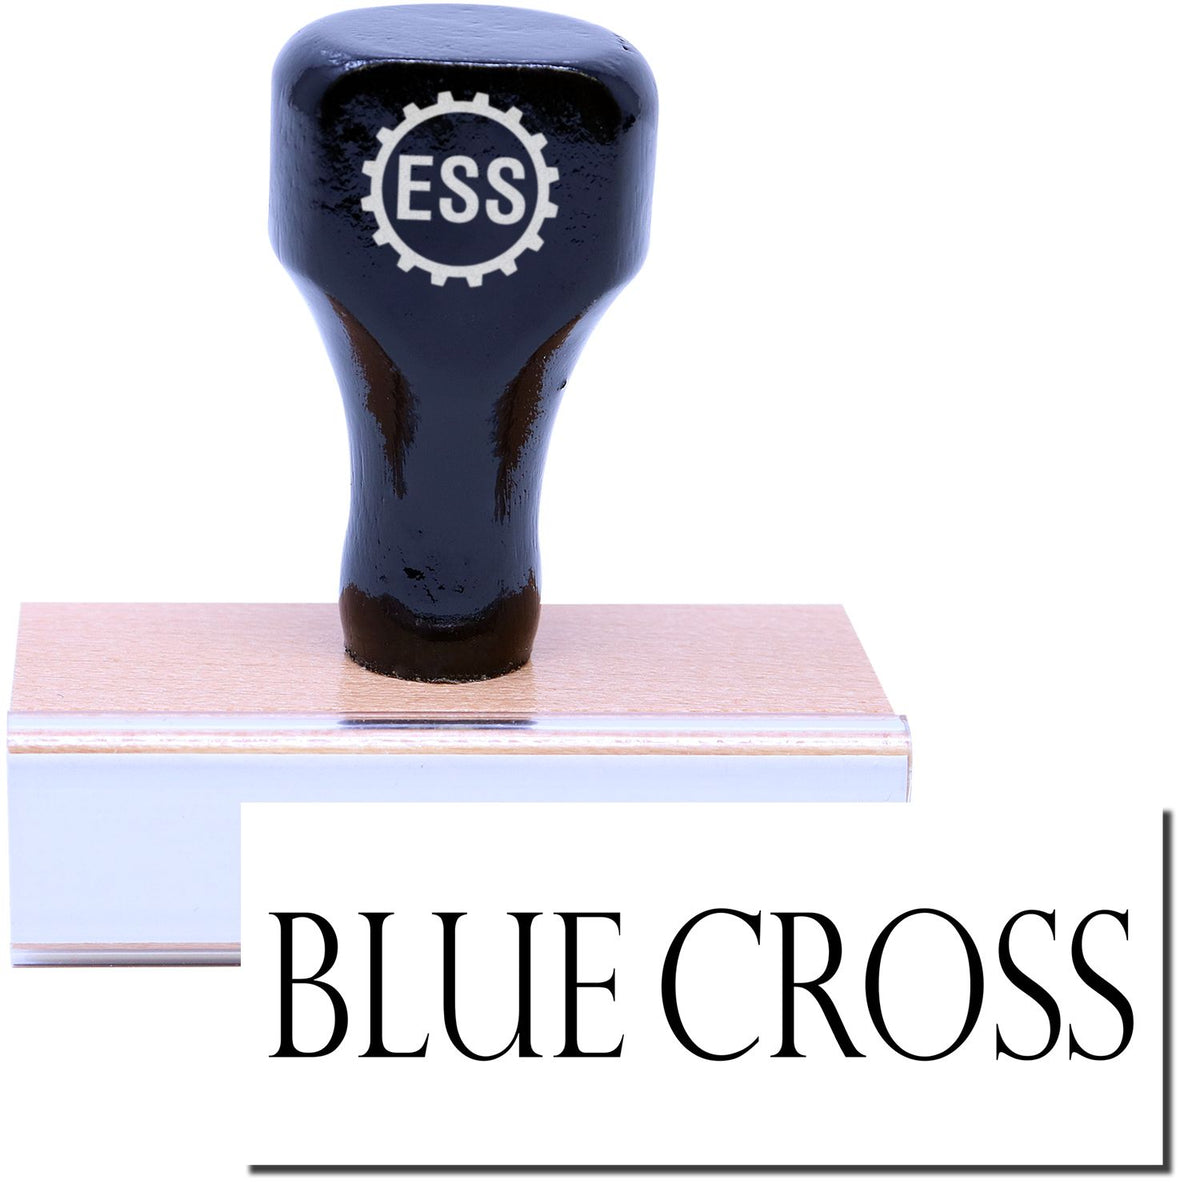 A stock office rubber stamp with a stamped image showing how the text &quot;BLUE CROSS&quot; is displayed after stamping.